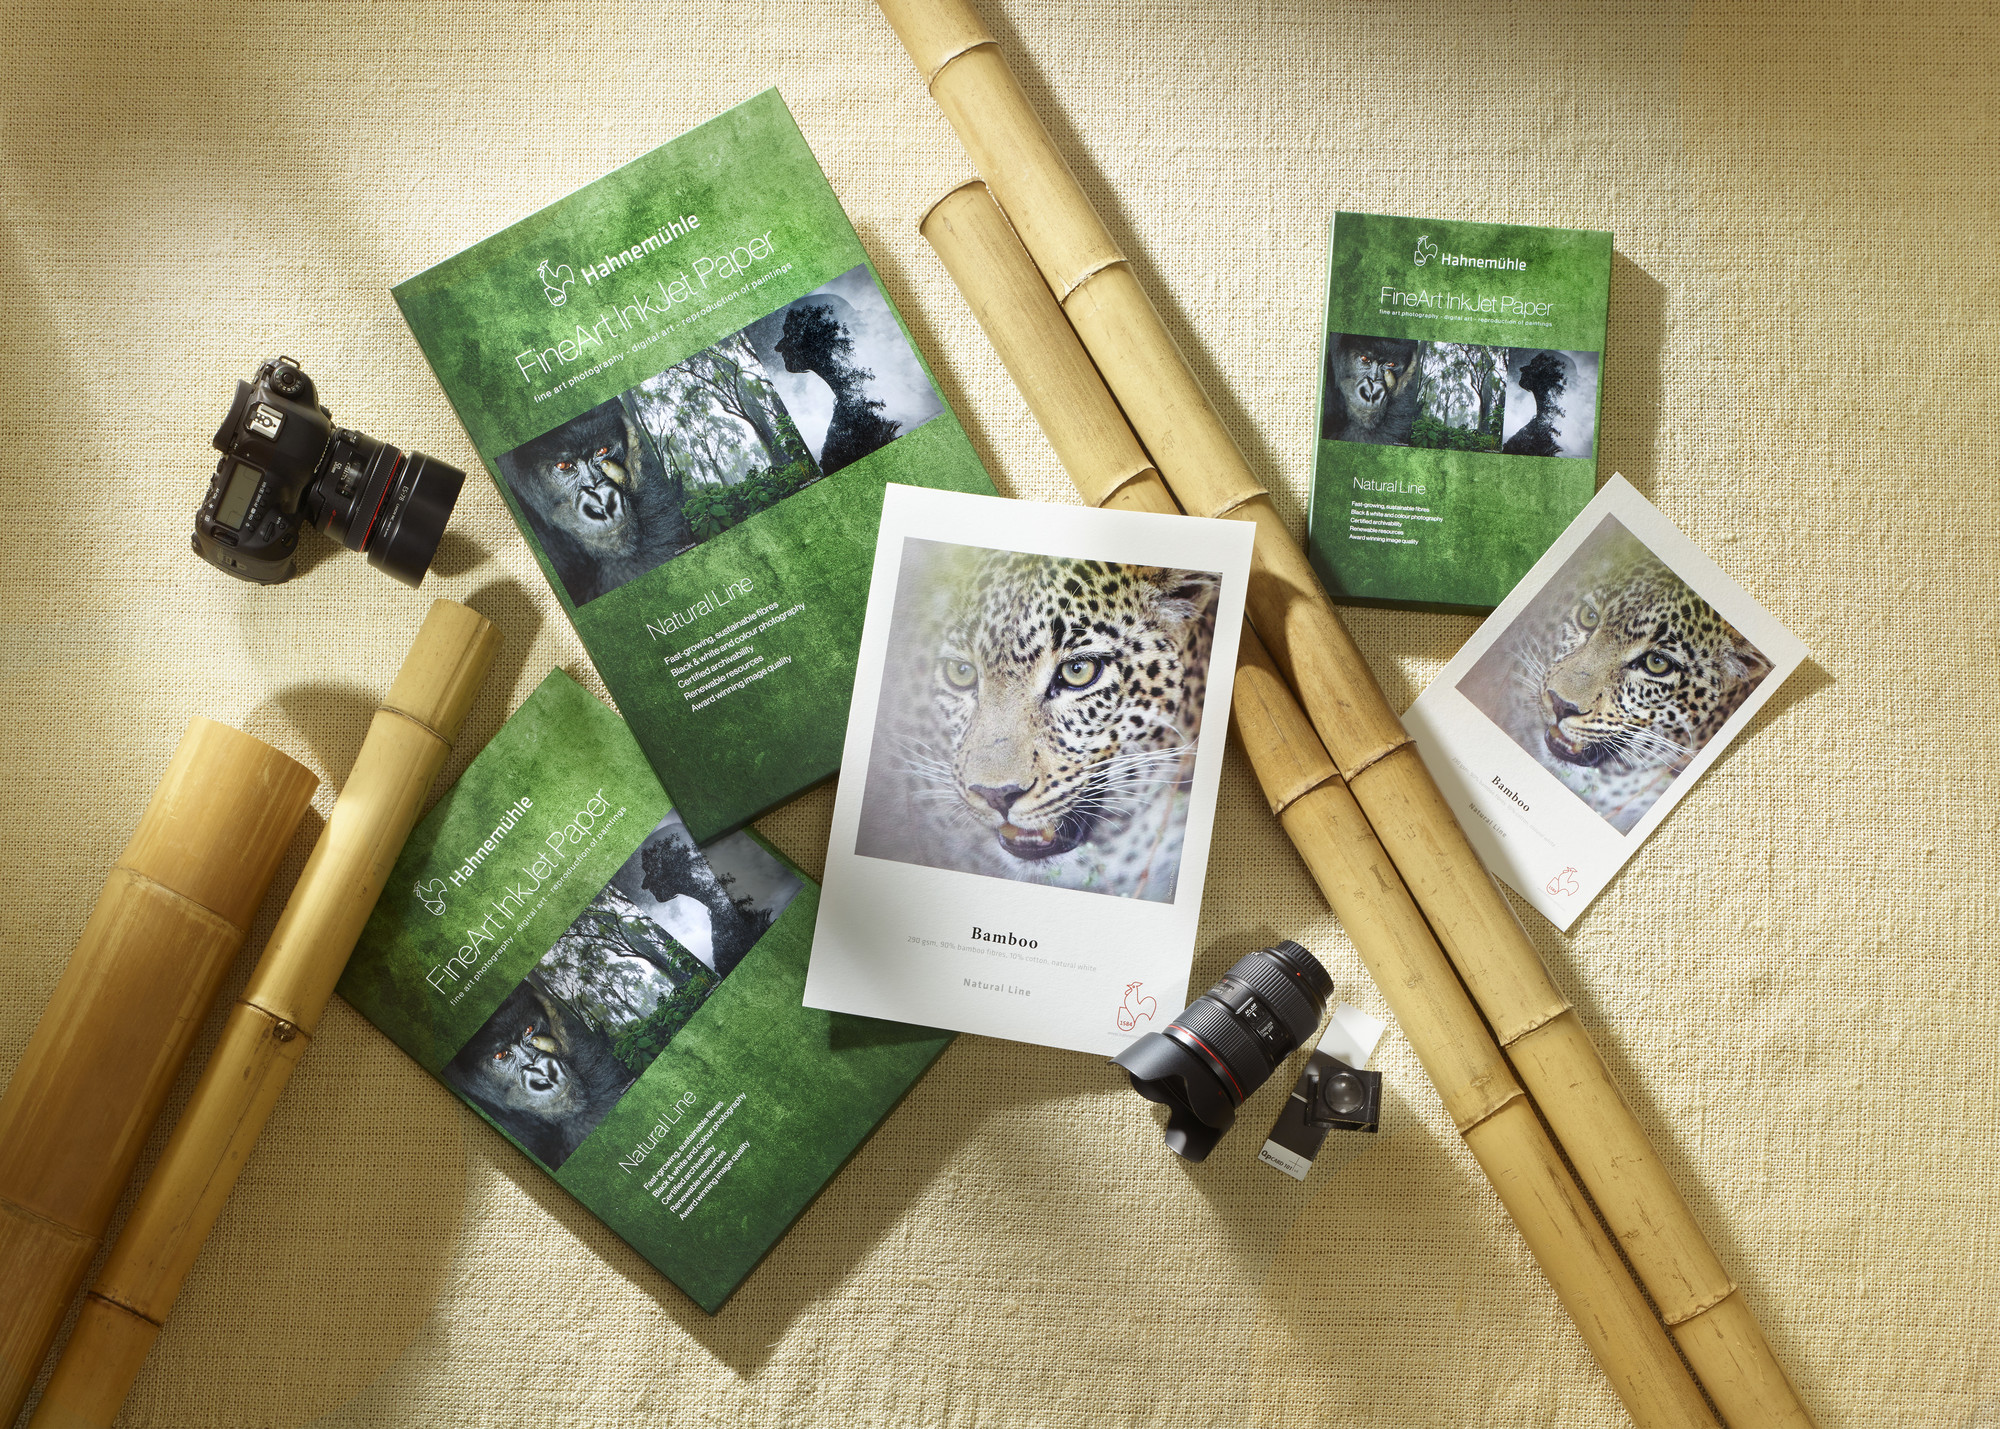 Several packs of Bamboo paper are pictured. Next to them are photo prints.